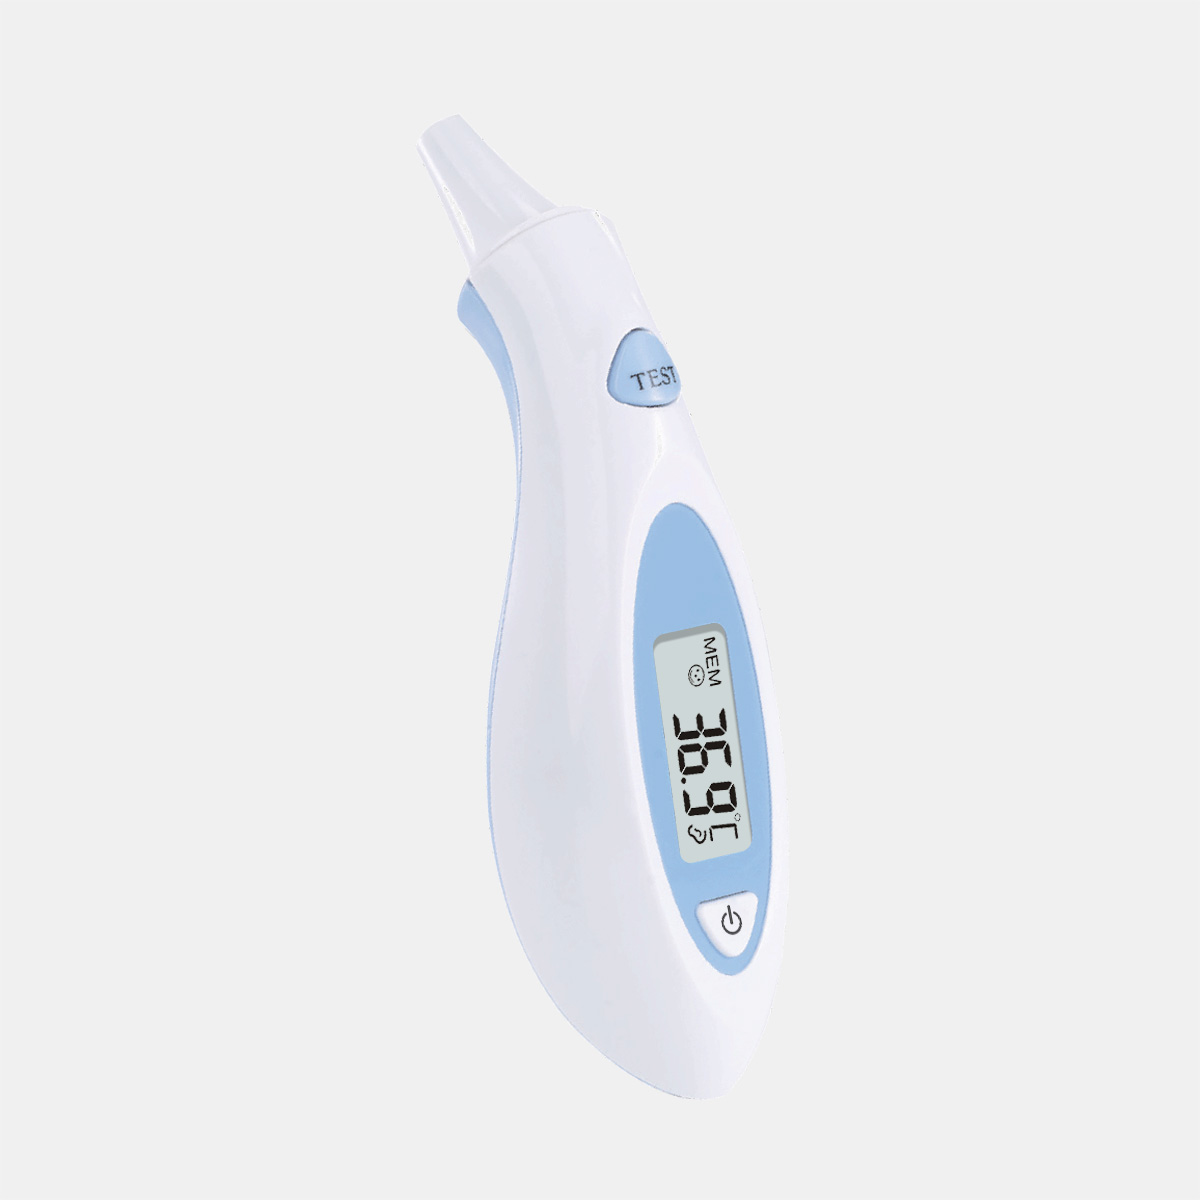 Sejoy Home Use Basic Ear Thermometer para sa Baby Infrared Fever Thermometer Pag-apruba ng CE MDR